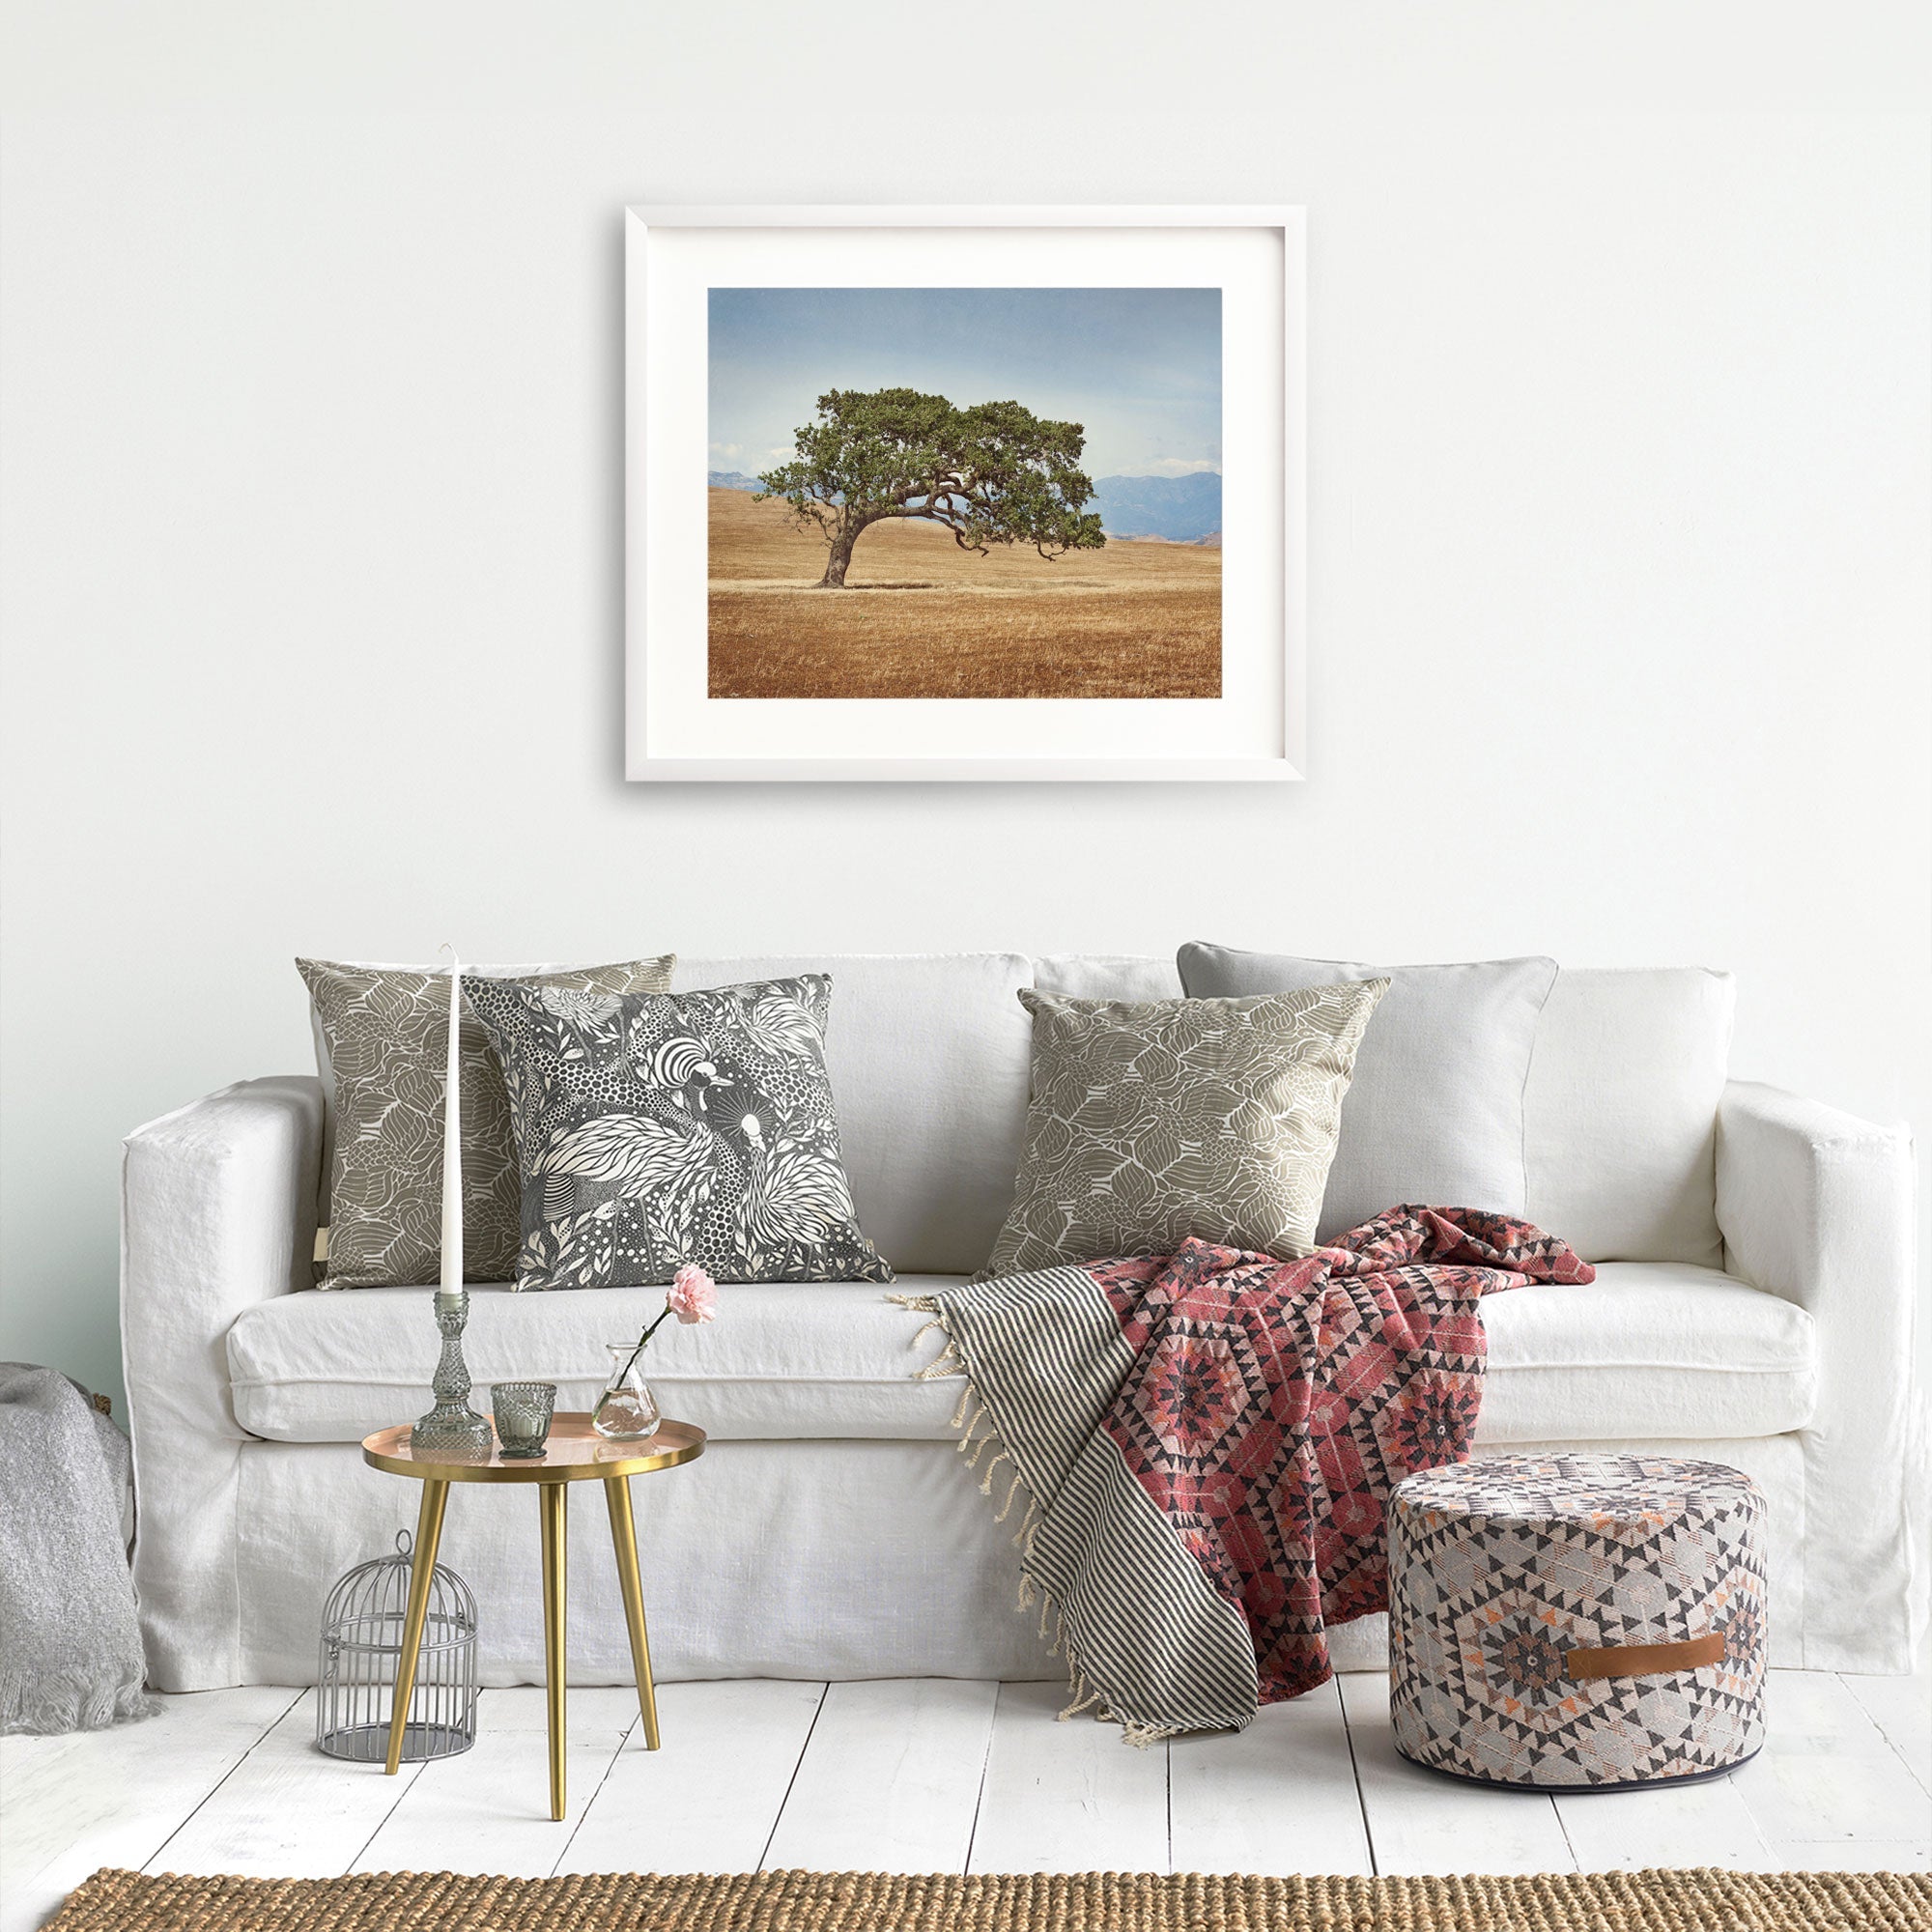 A cozy living room featuring a white sofa adorned with patterned cushions, a red throw blanket, a small round gold table with decorative items, and a framed California Oak Tree Print, 'Windswept' from Offley Green on the wall above.